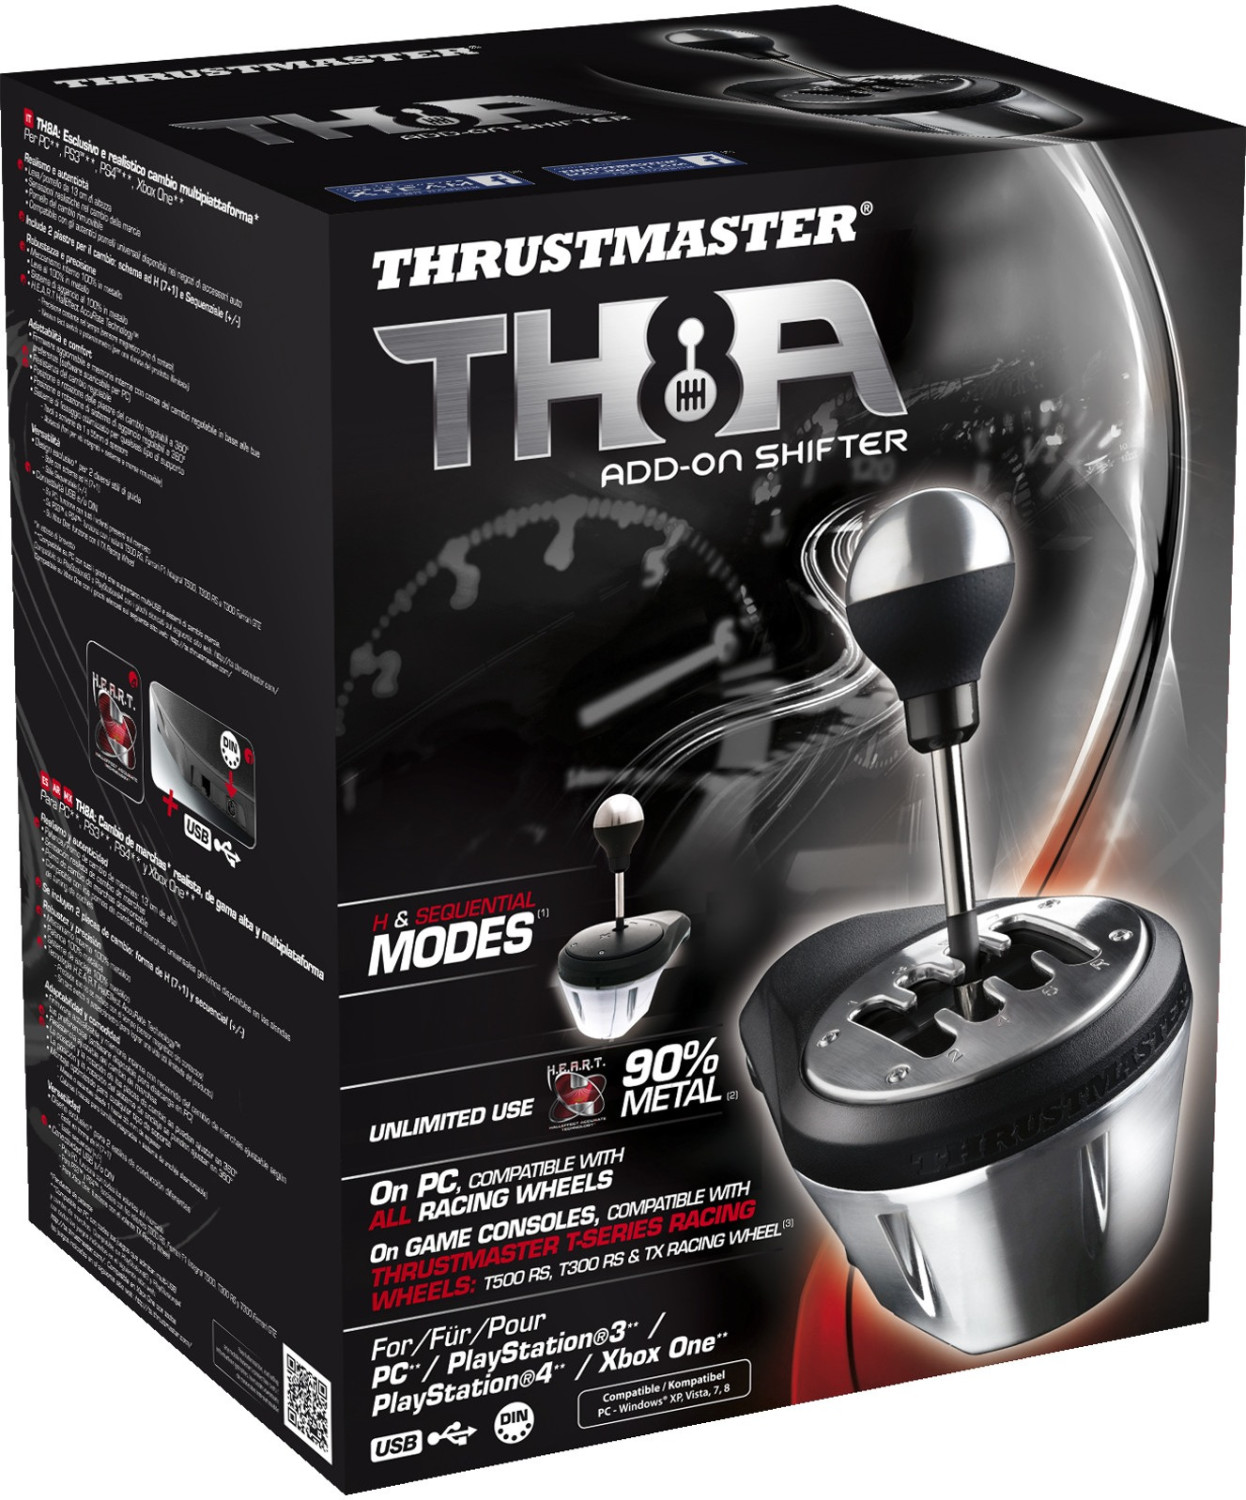 Buy Thrustmaster TH8A Add-on Shifter from £146.99 (Today) – Best Deals on